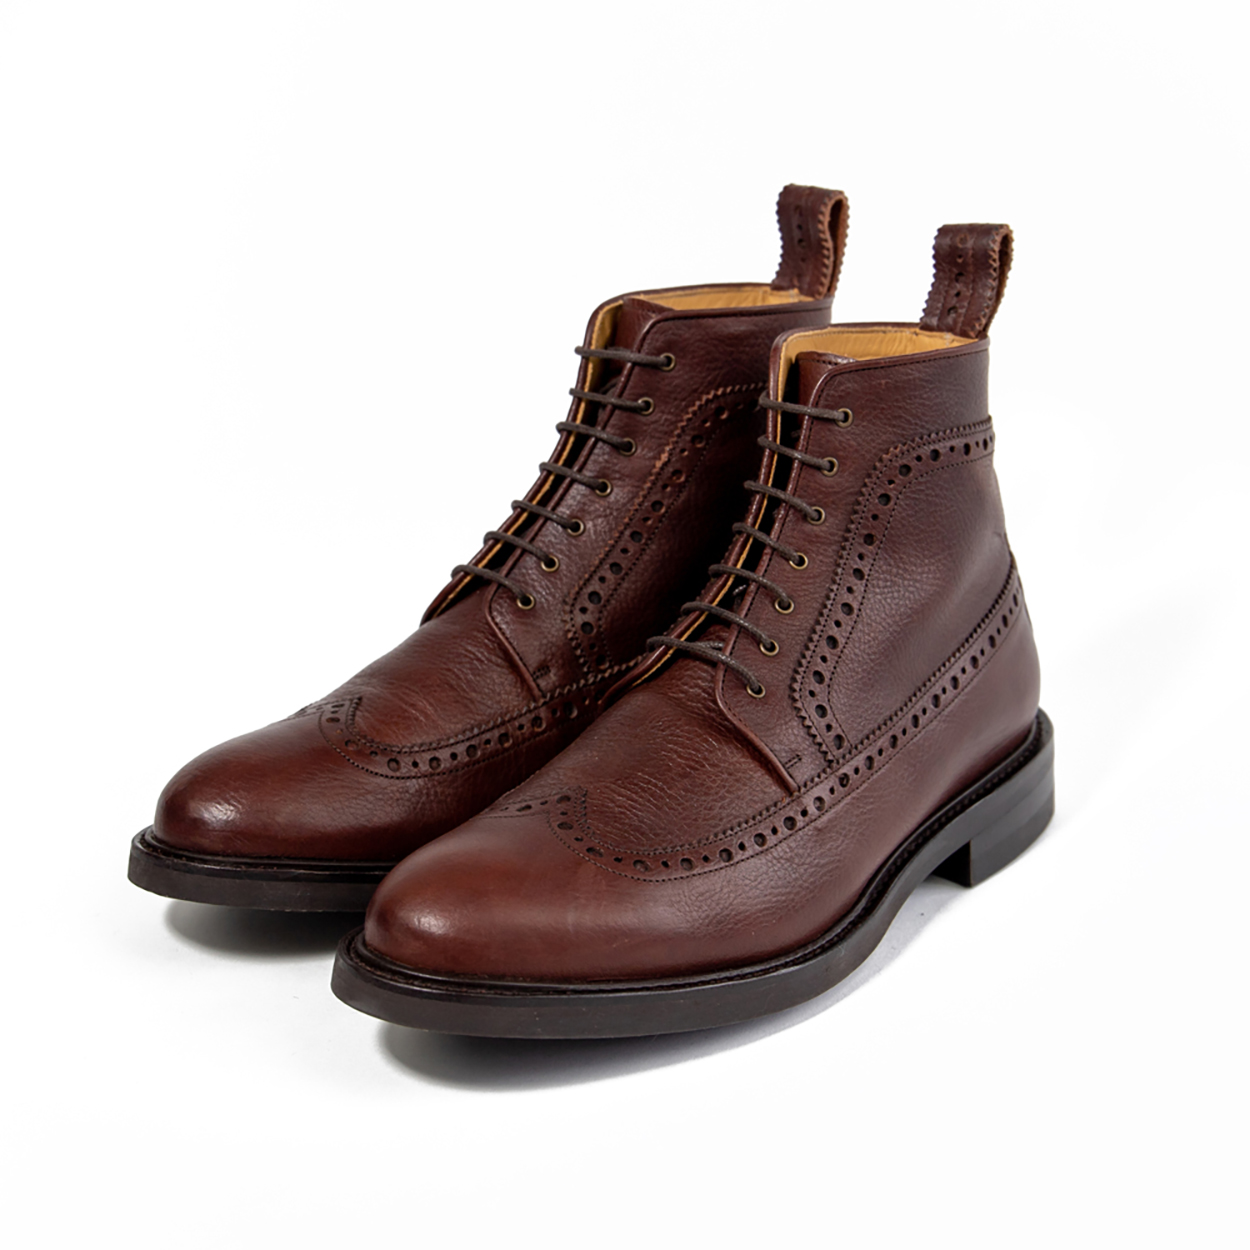 goodyear welted lace-up boots